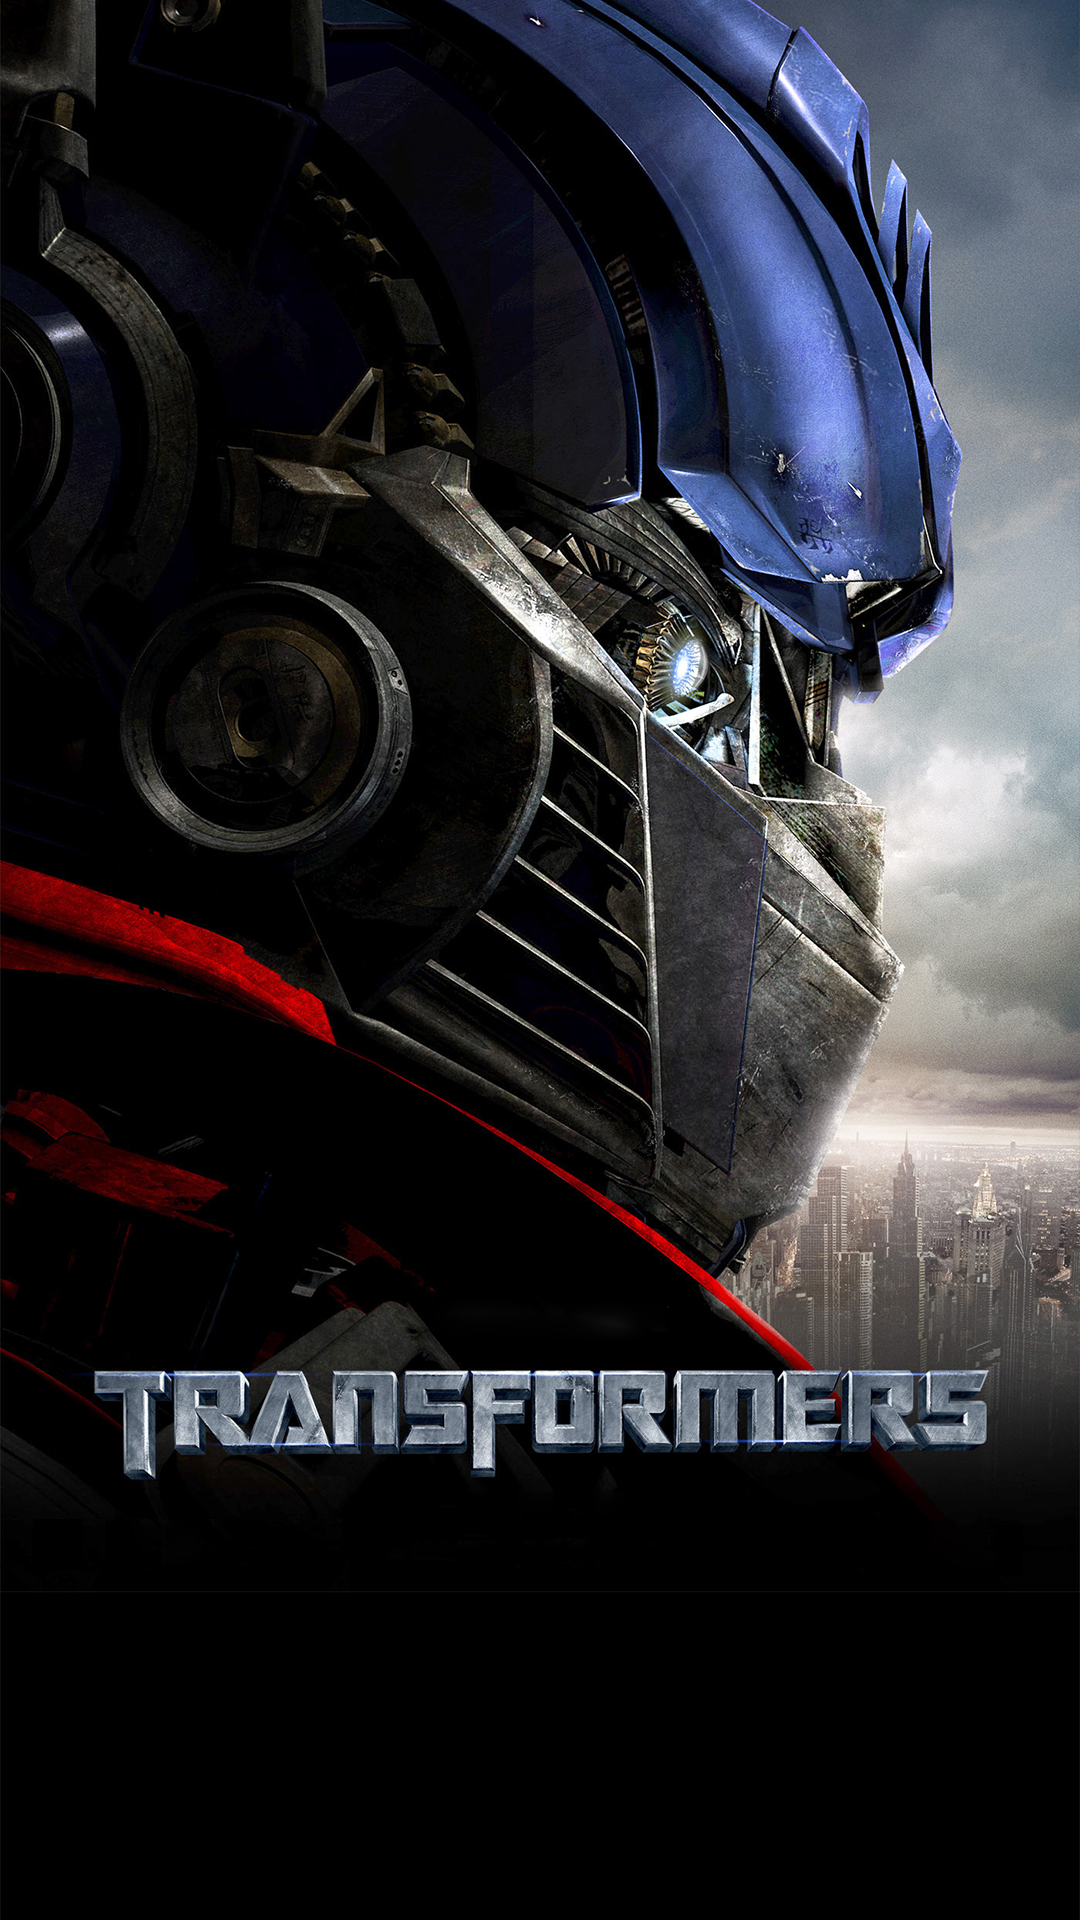 transformers wallpaper android,helmet,personal protective equipment,poster,automotive design,fictional character